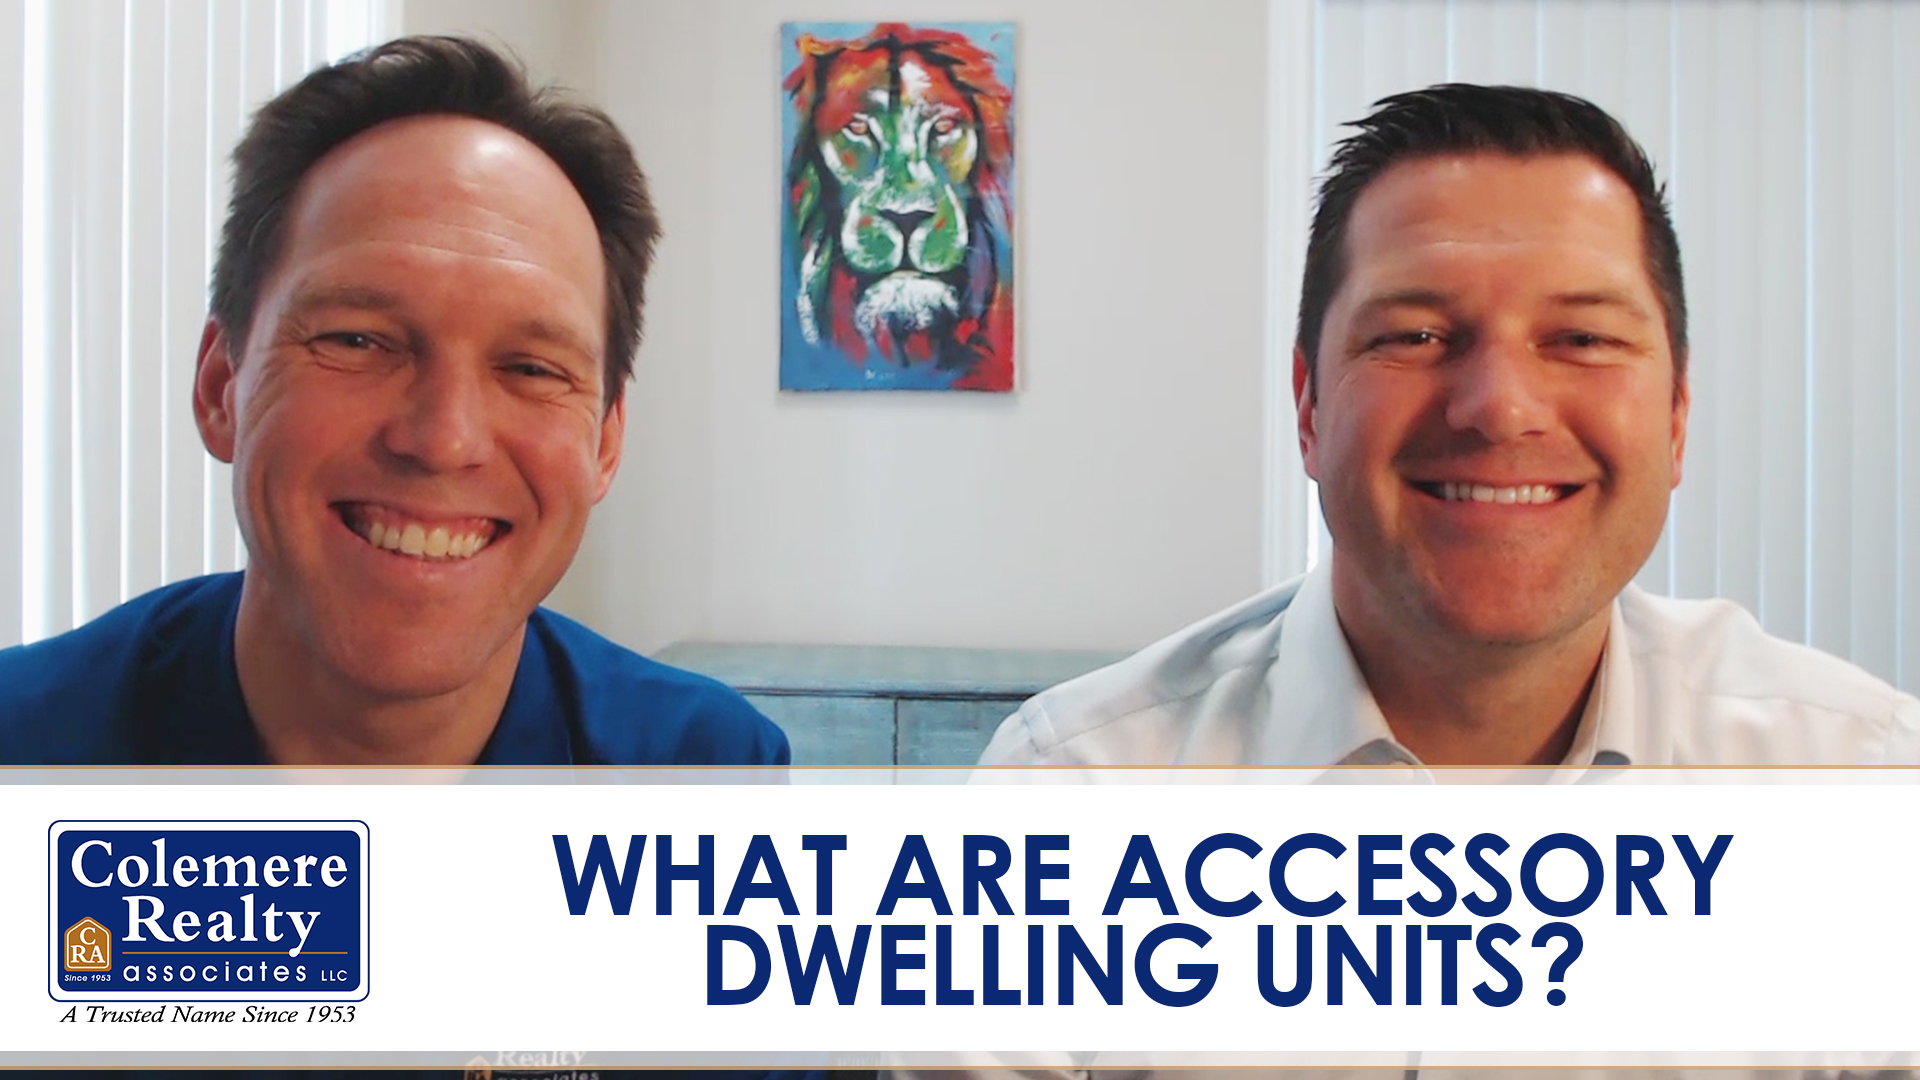 Check Out This Quick Guide to Accessory Dwelling Units